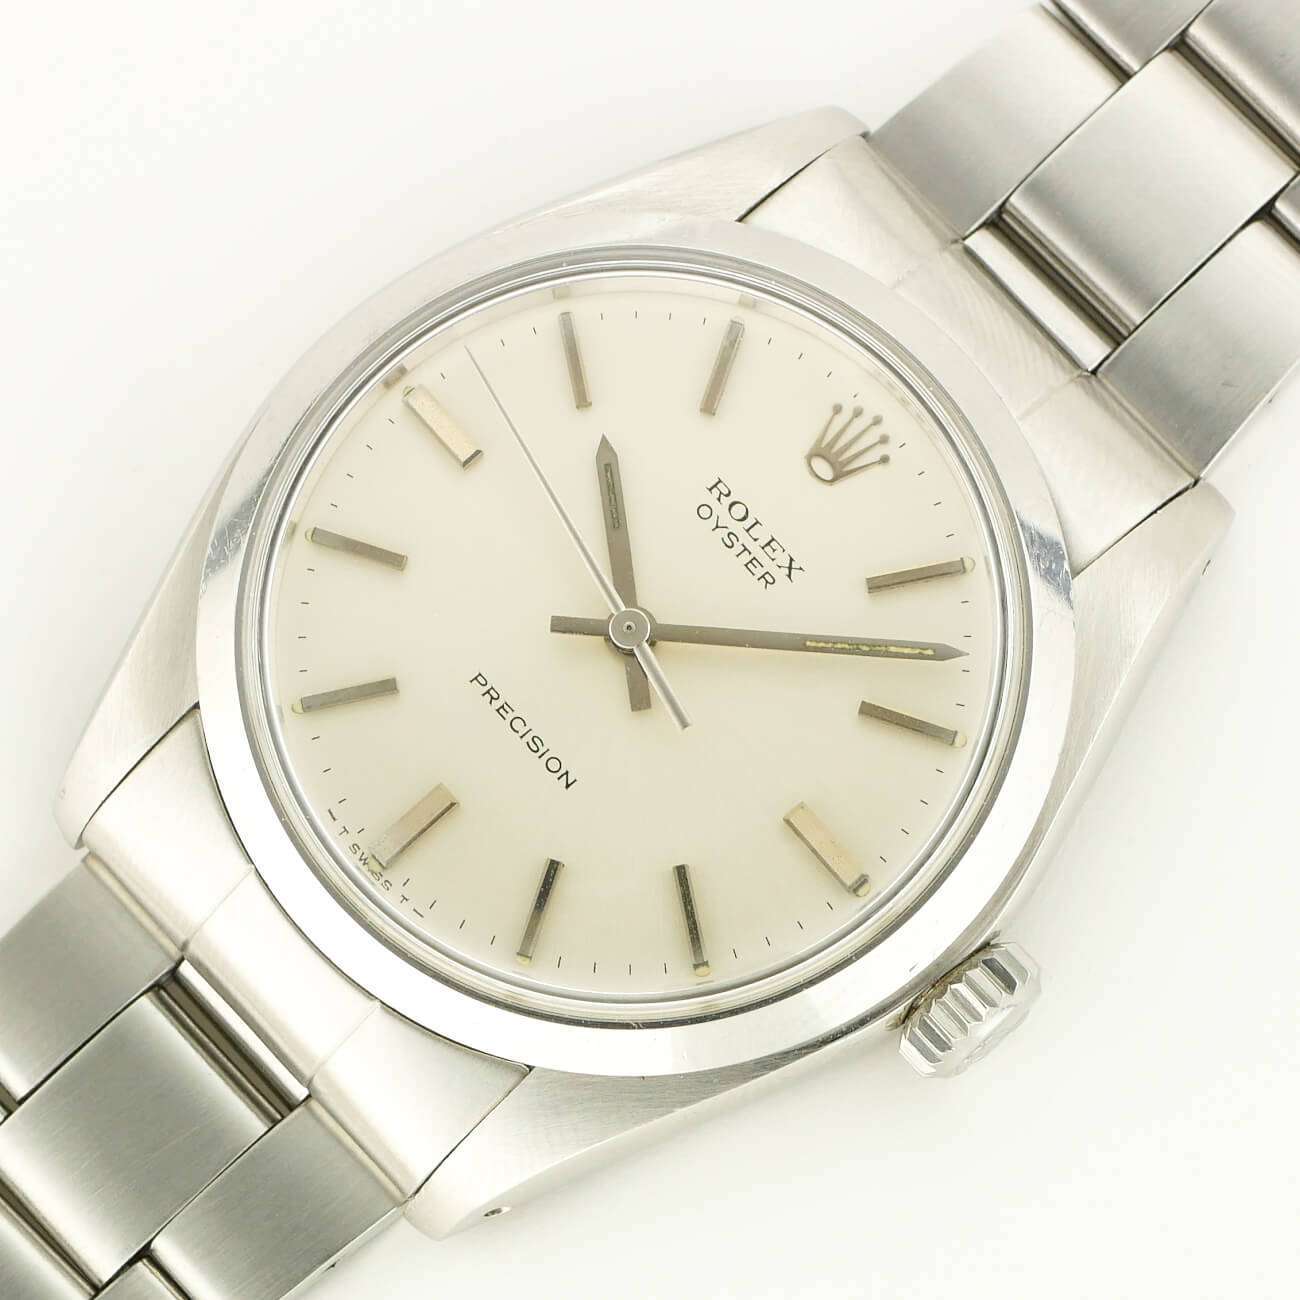 ROLEX OYSTER